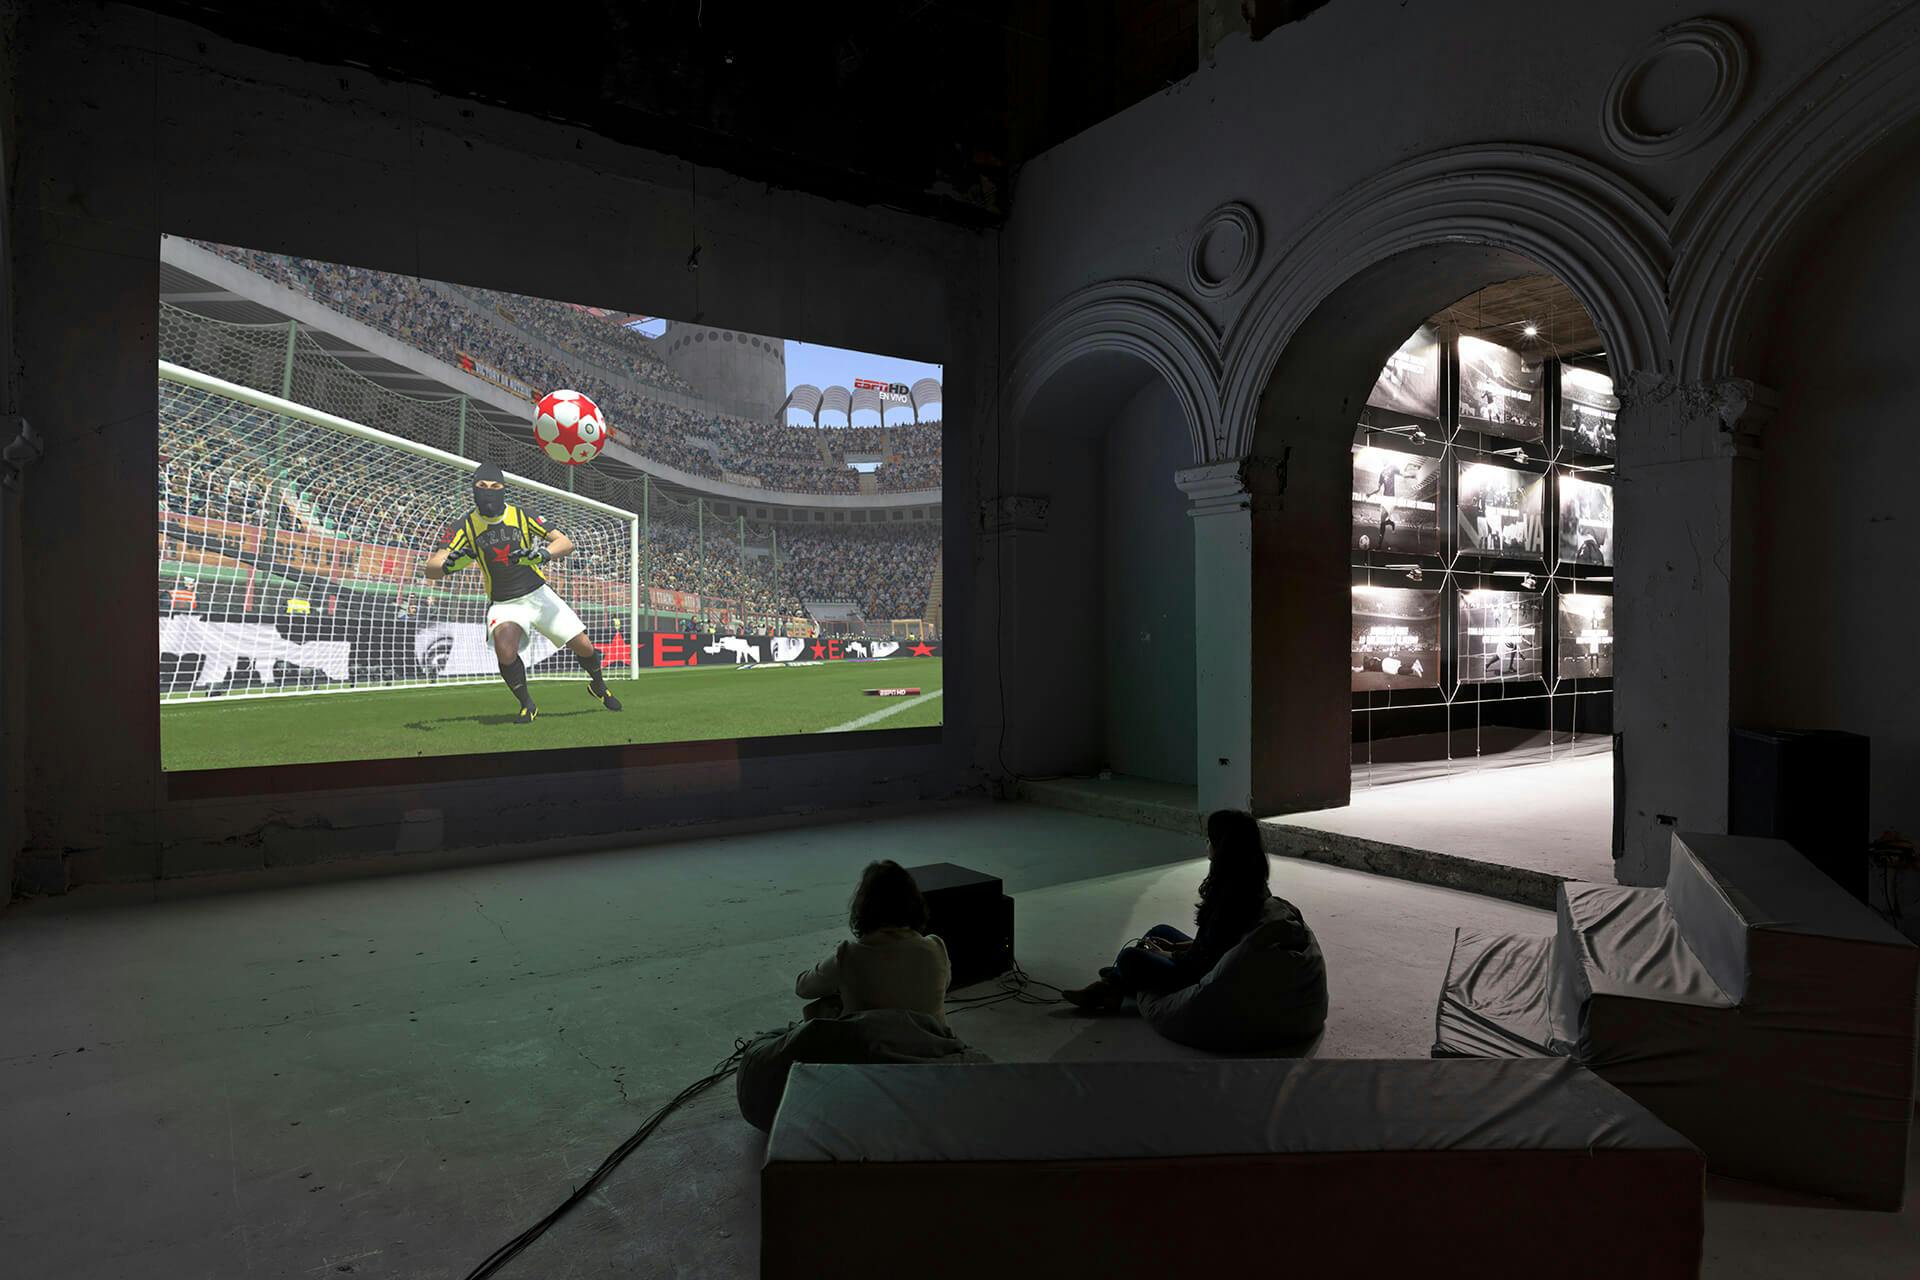 Viewers watch a screen displaying a soccer game, as part of an installation.